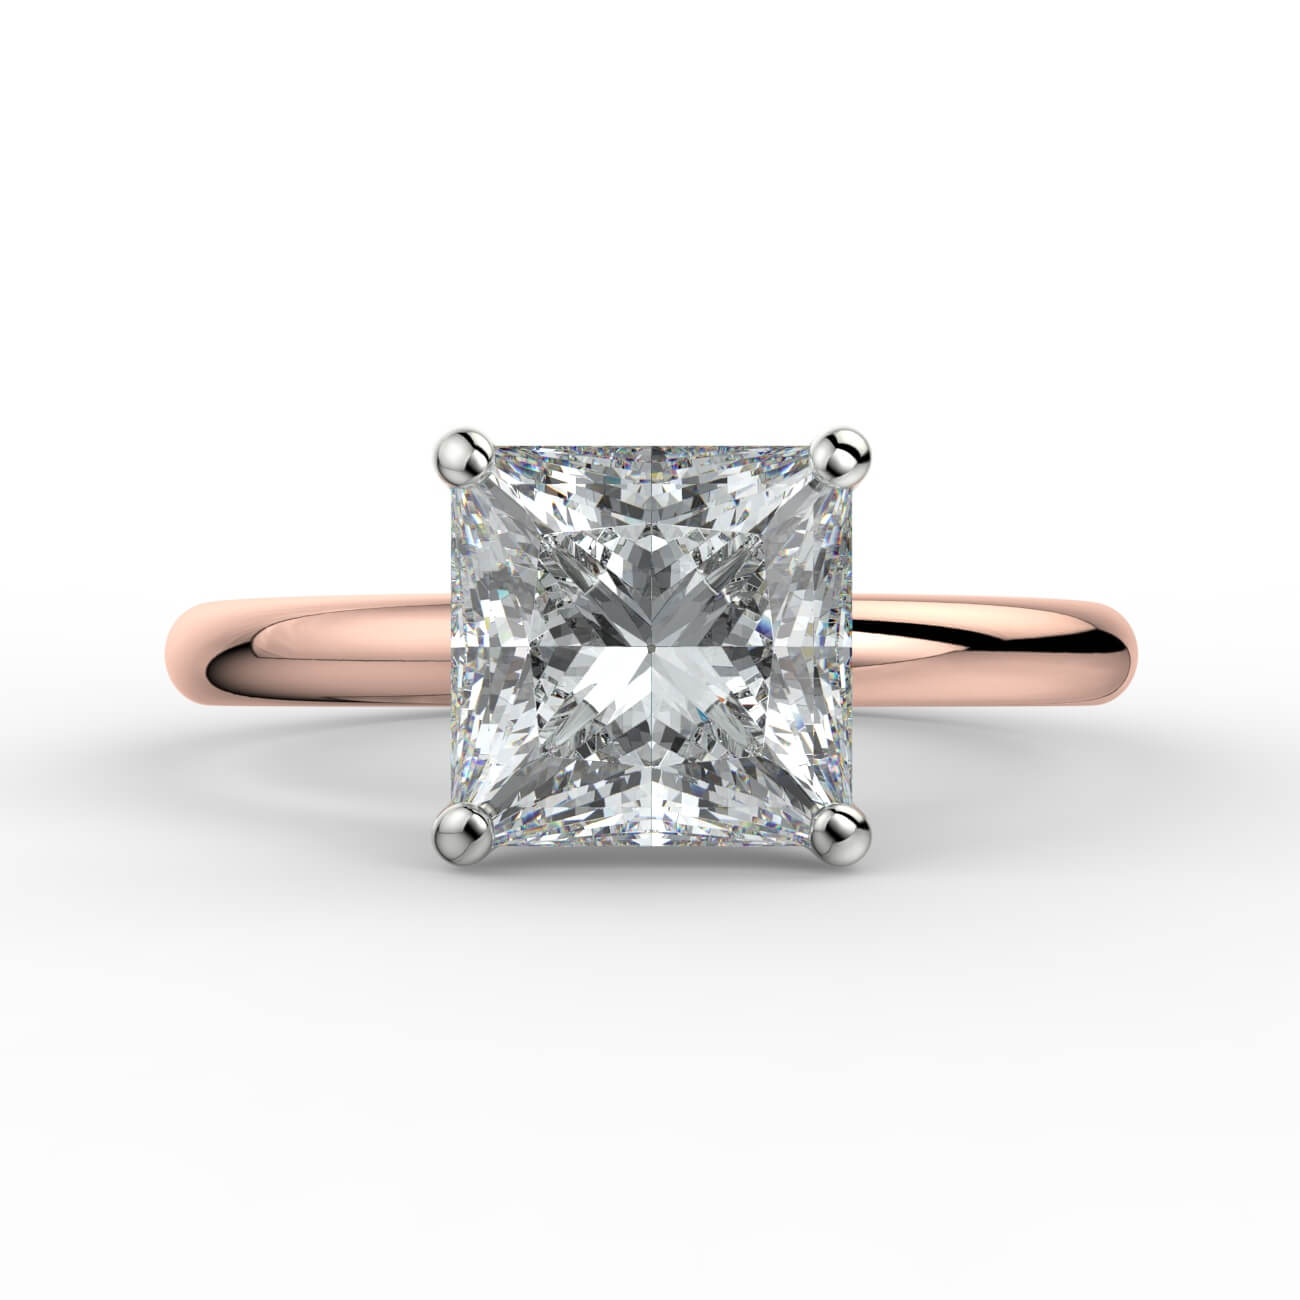 Comfort fit 4 claw princess cut solitaire diamond ring in white and rose gold – Australian Diamond Network